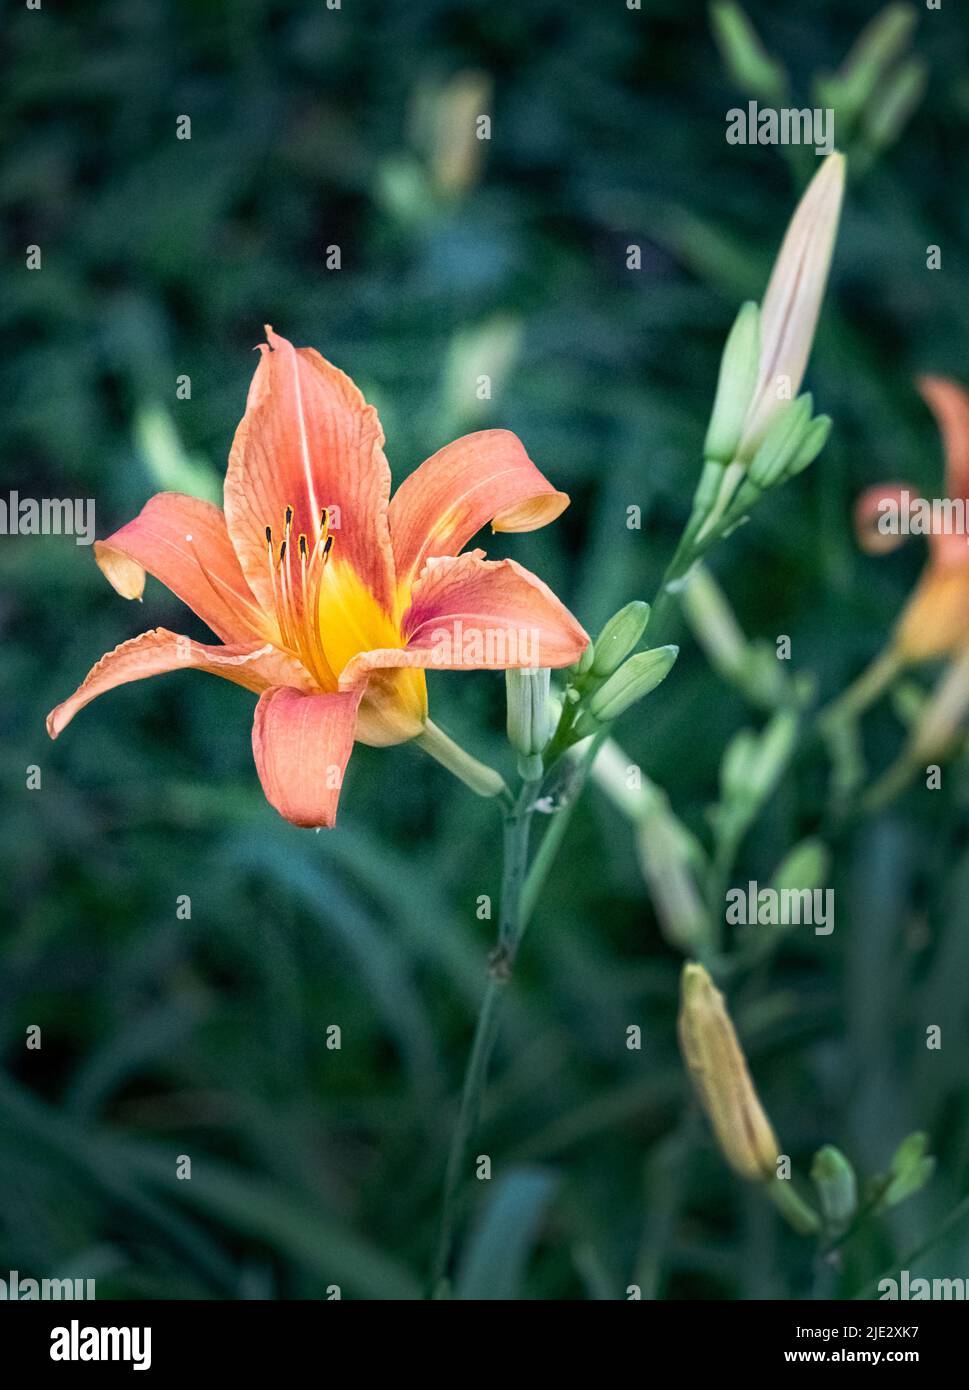 An orange day lily or tiger lily, Lilium lancifolium, shining in dappled sunlight on a blurred green background, spring, summer, Pennsylvania Stock Photo